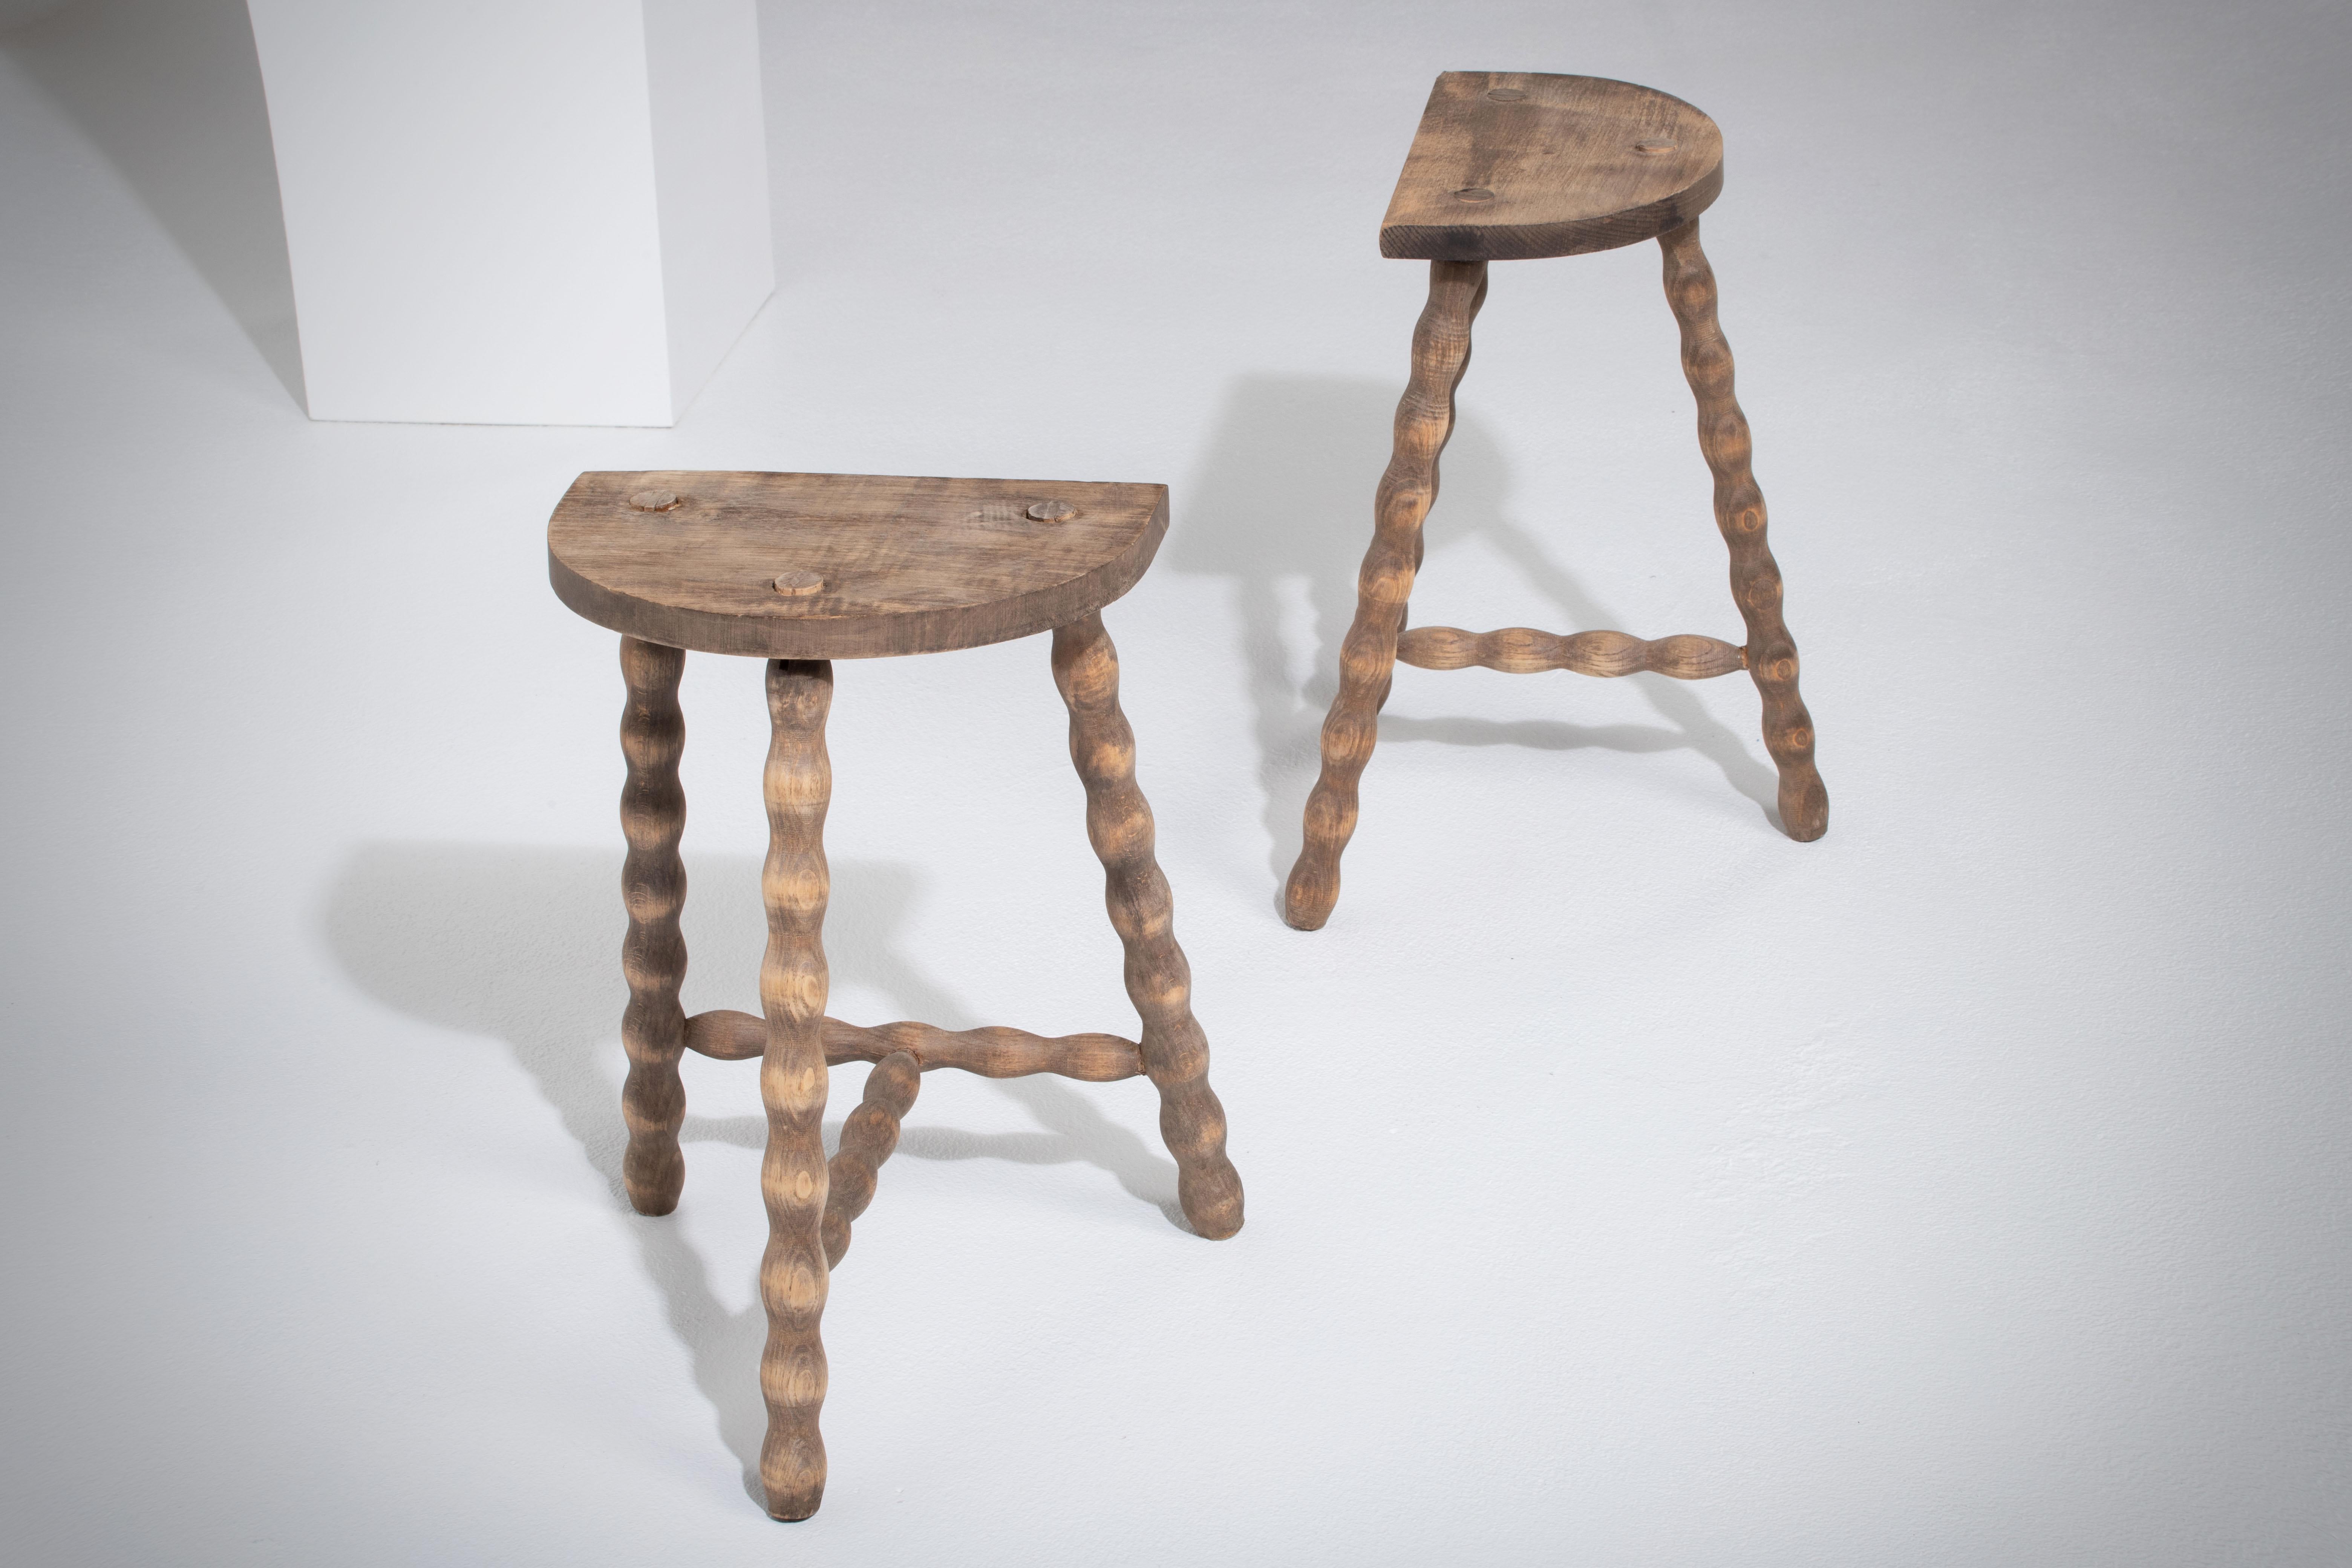 Hand-Carved French Brutalist Tripod Stool, a Pair, Bleached